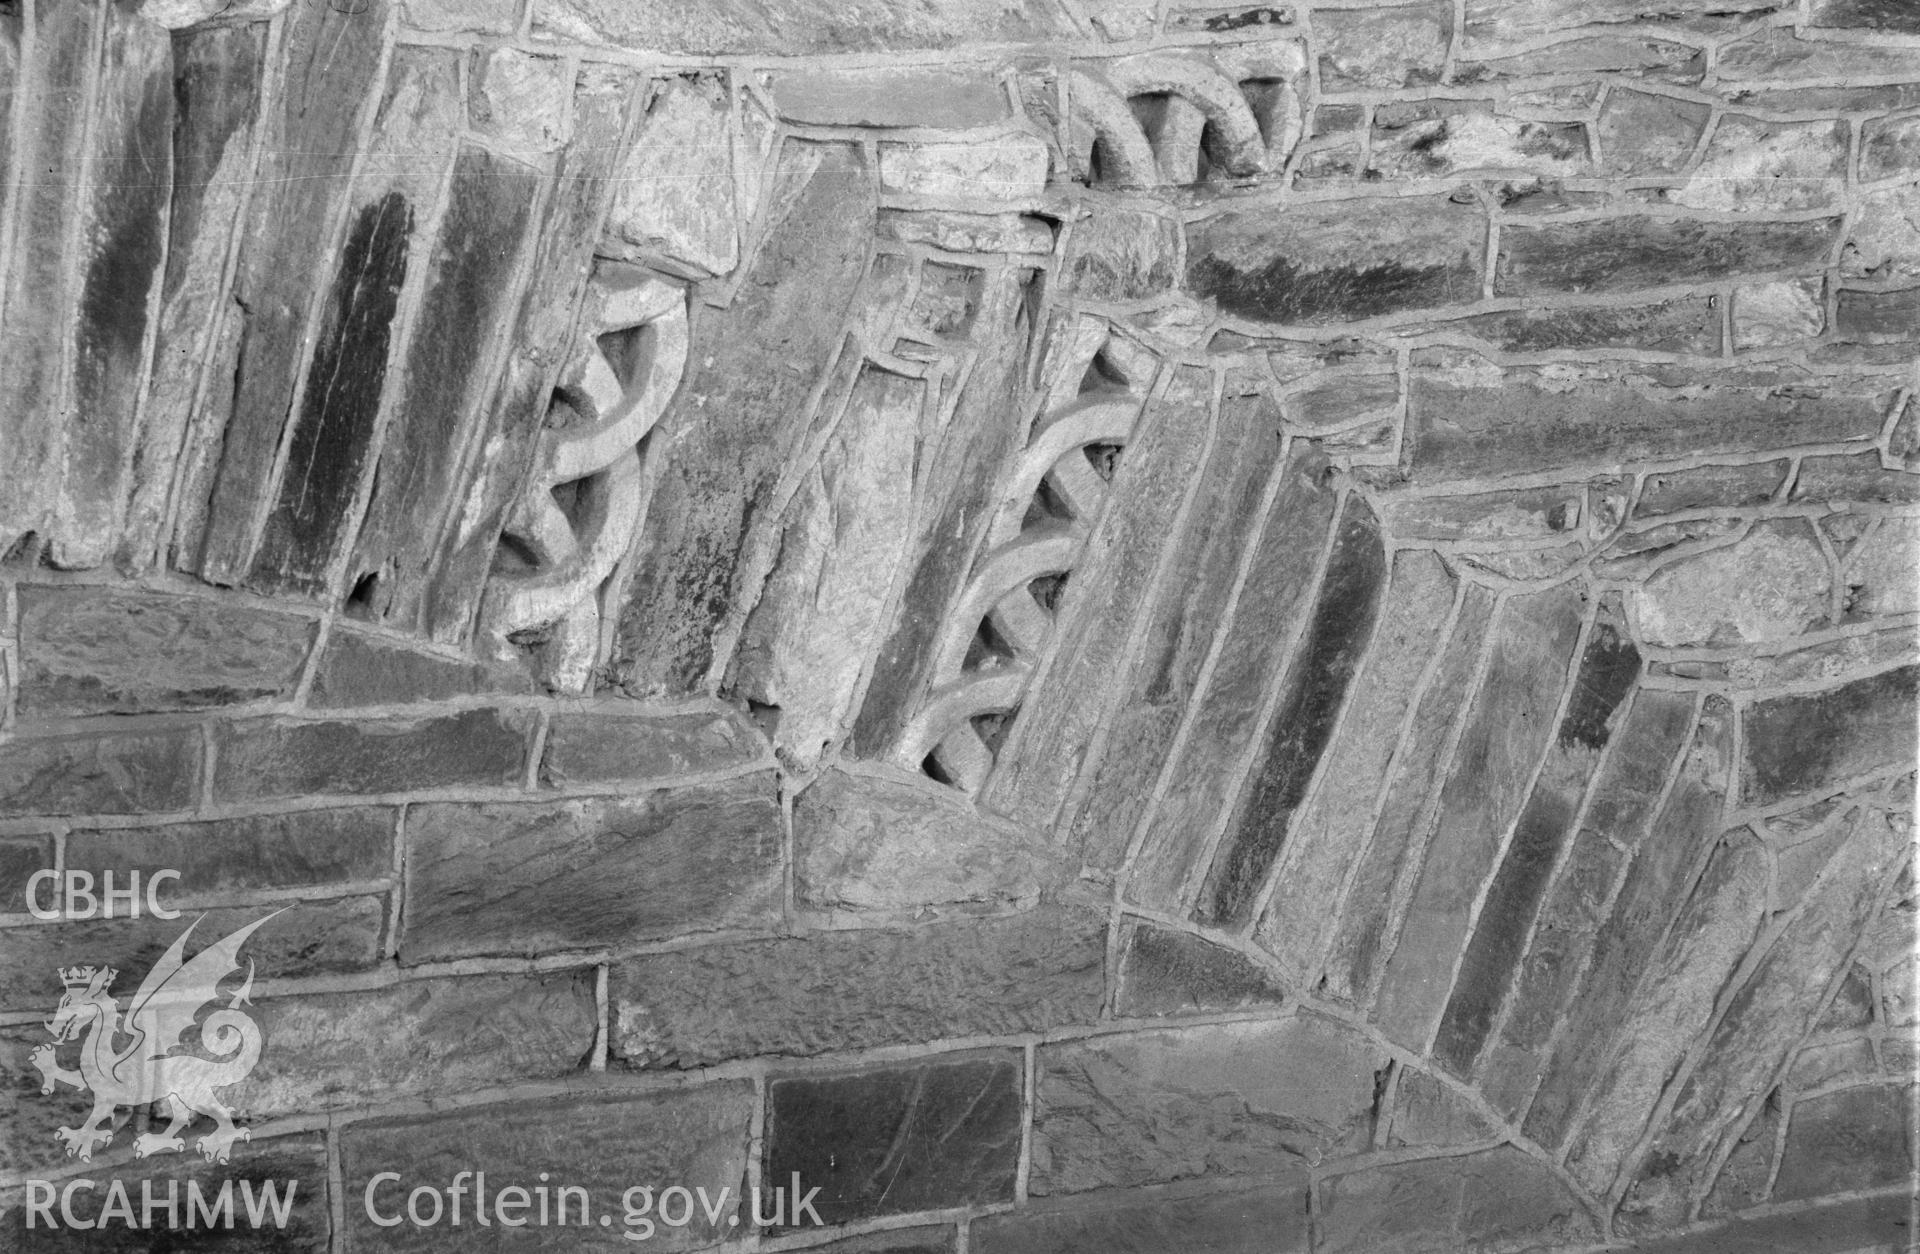 Digital copy of a black and white nitrate negative showing detailed view of stonework arch at St. David's Cathedral, taken by E.W. Lovegrove, July 1936.